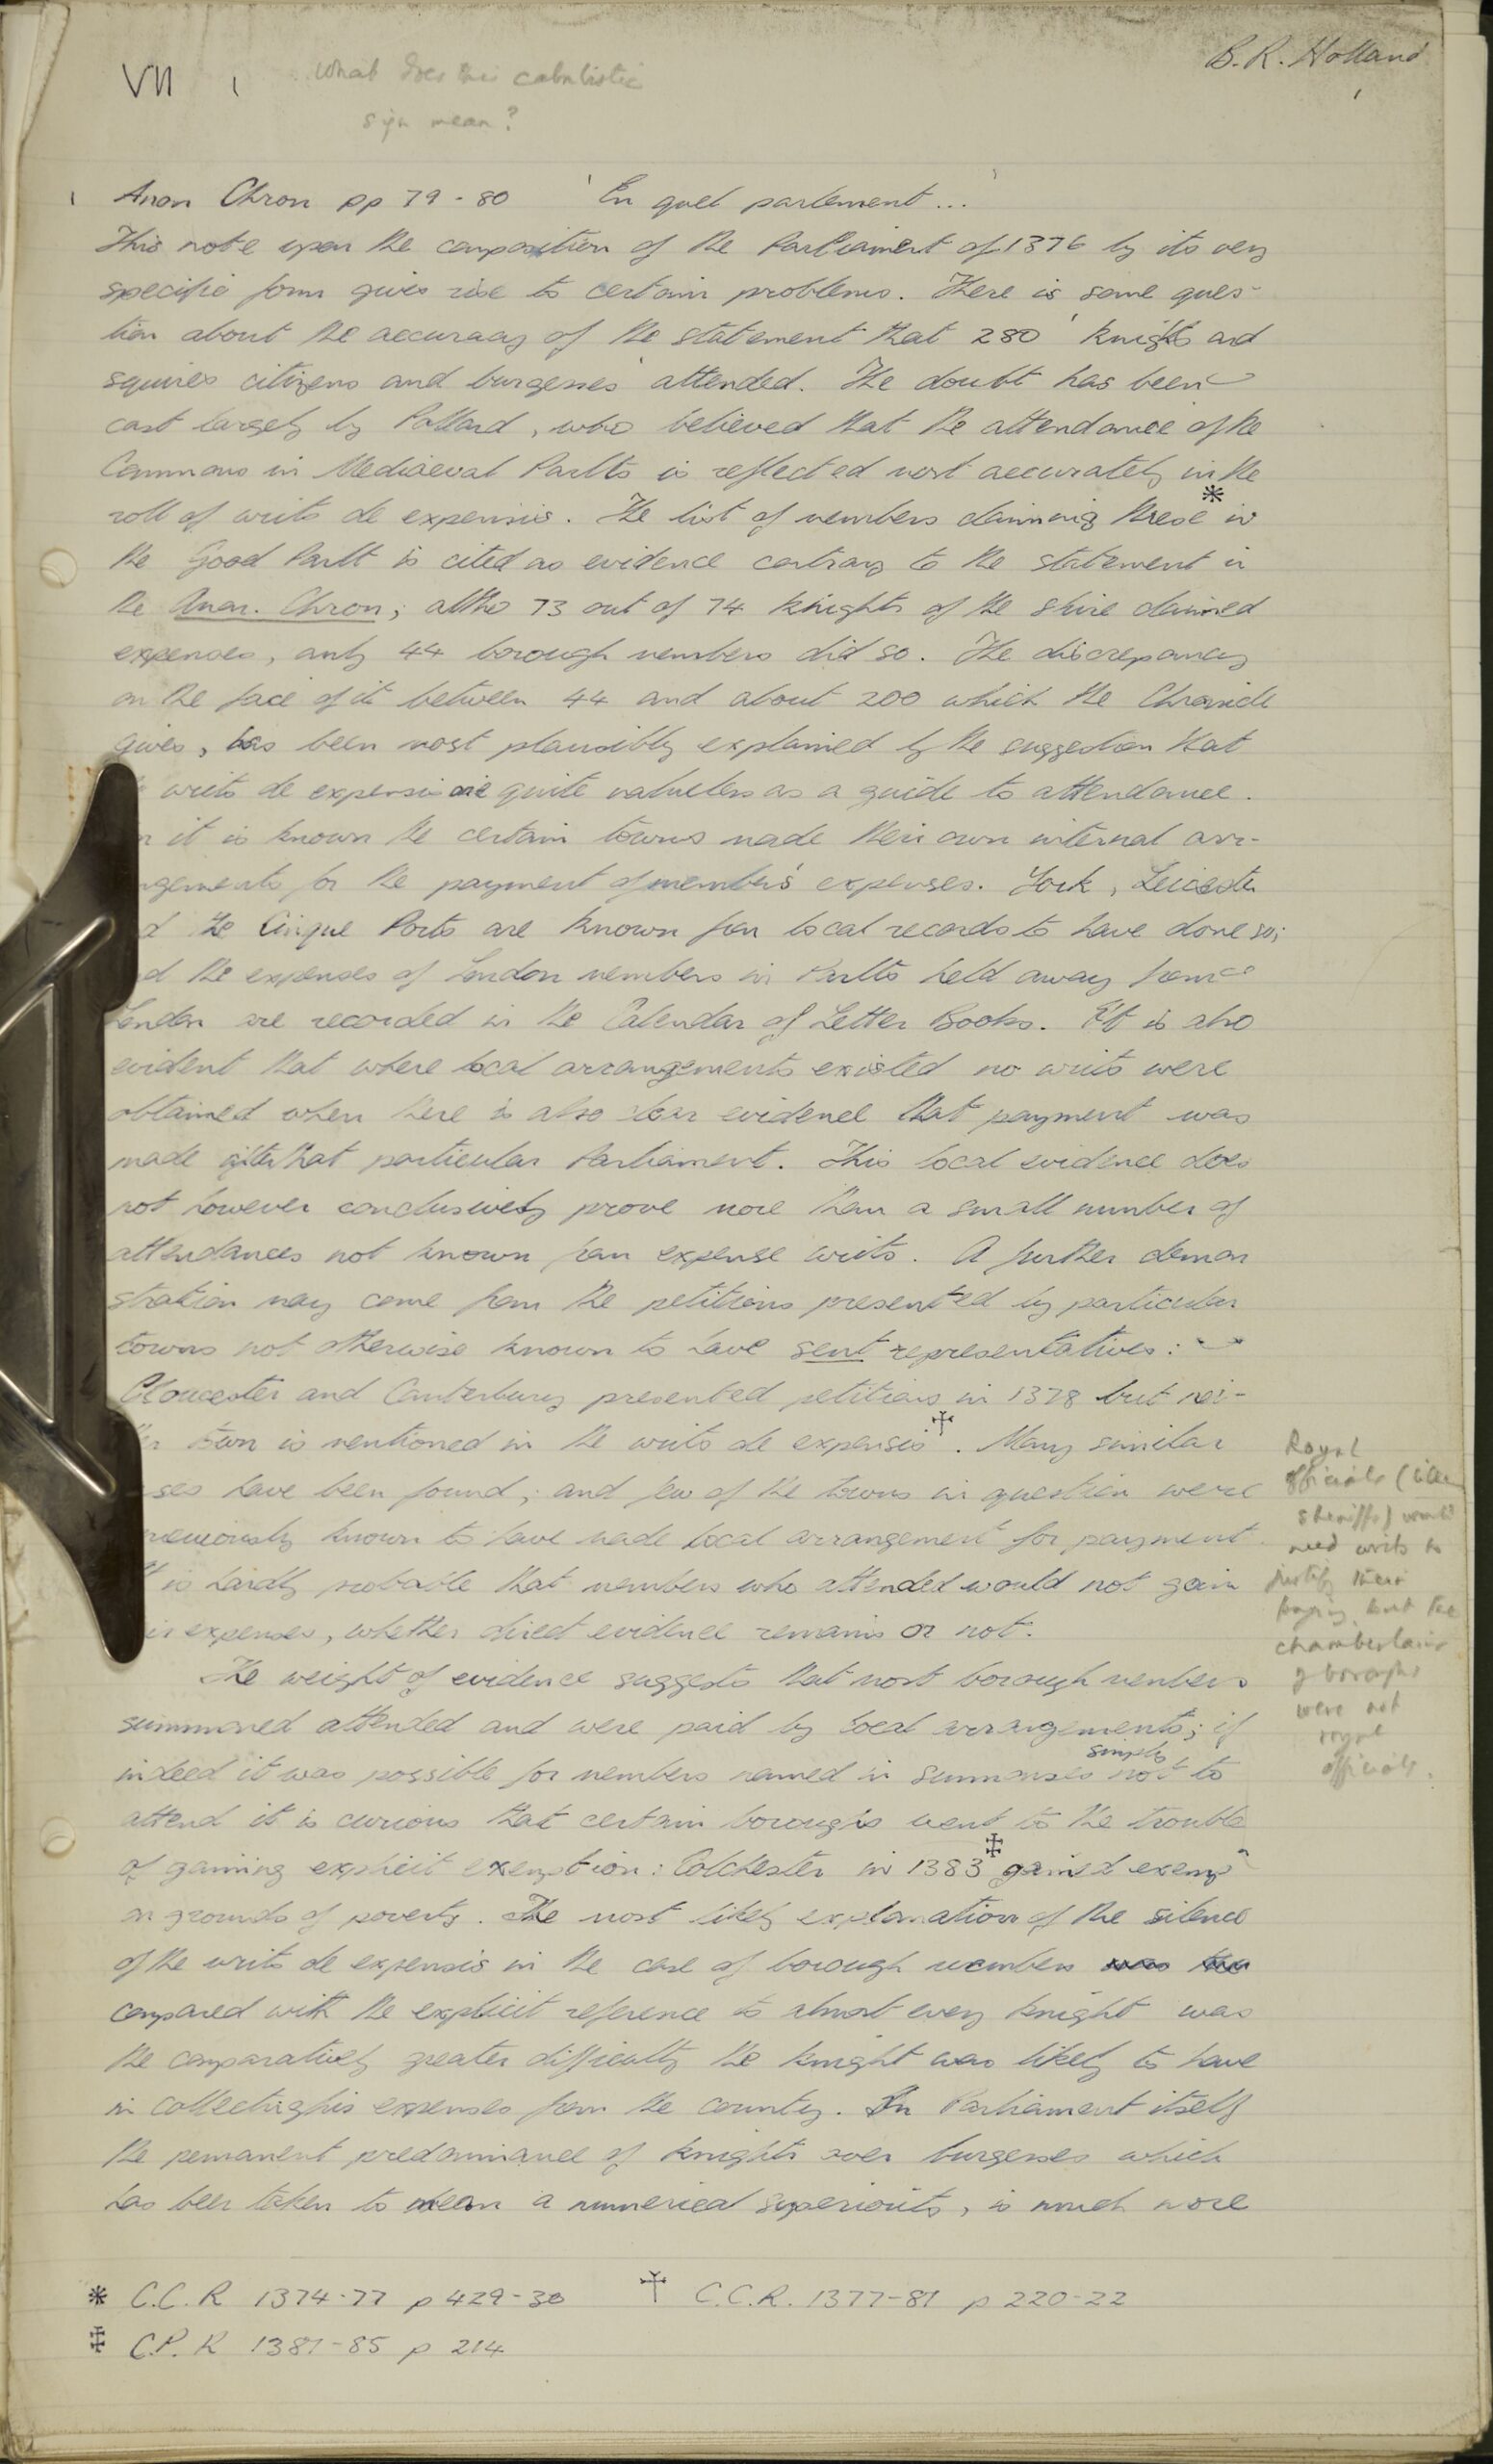 Page 1 of a handwritten essay by Robert Holland on A4 lined paper. In the wide margin left by Holland, the marker (K.B. McFarlane) has written a correction.